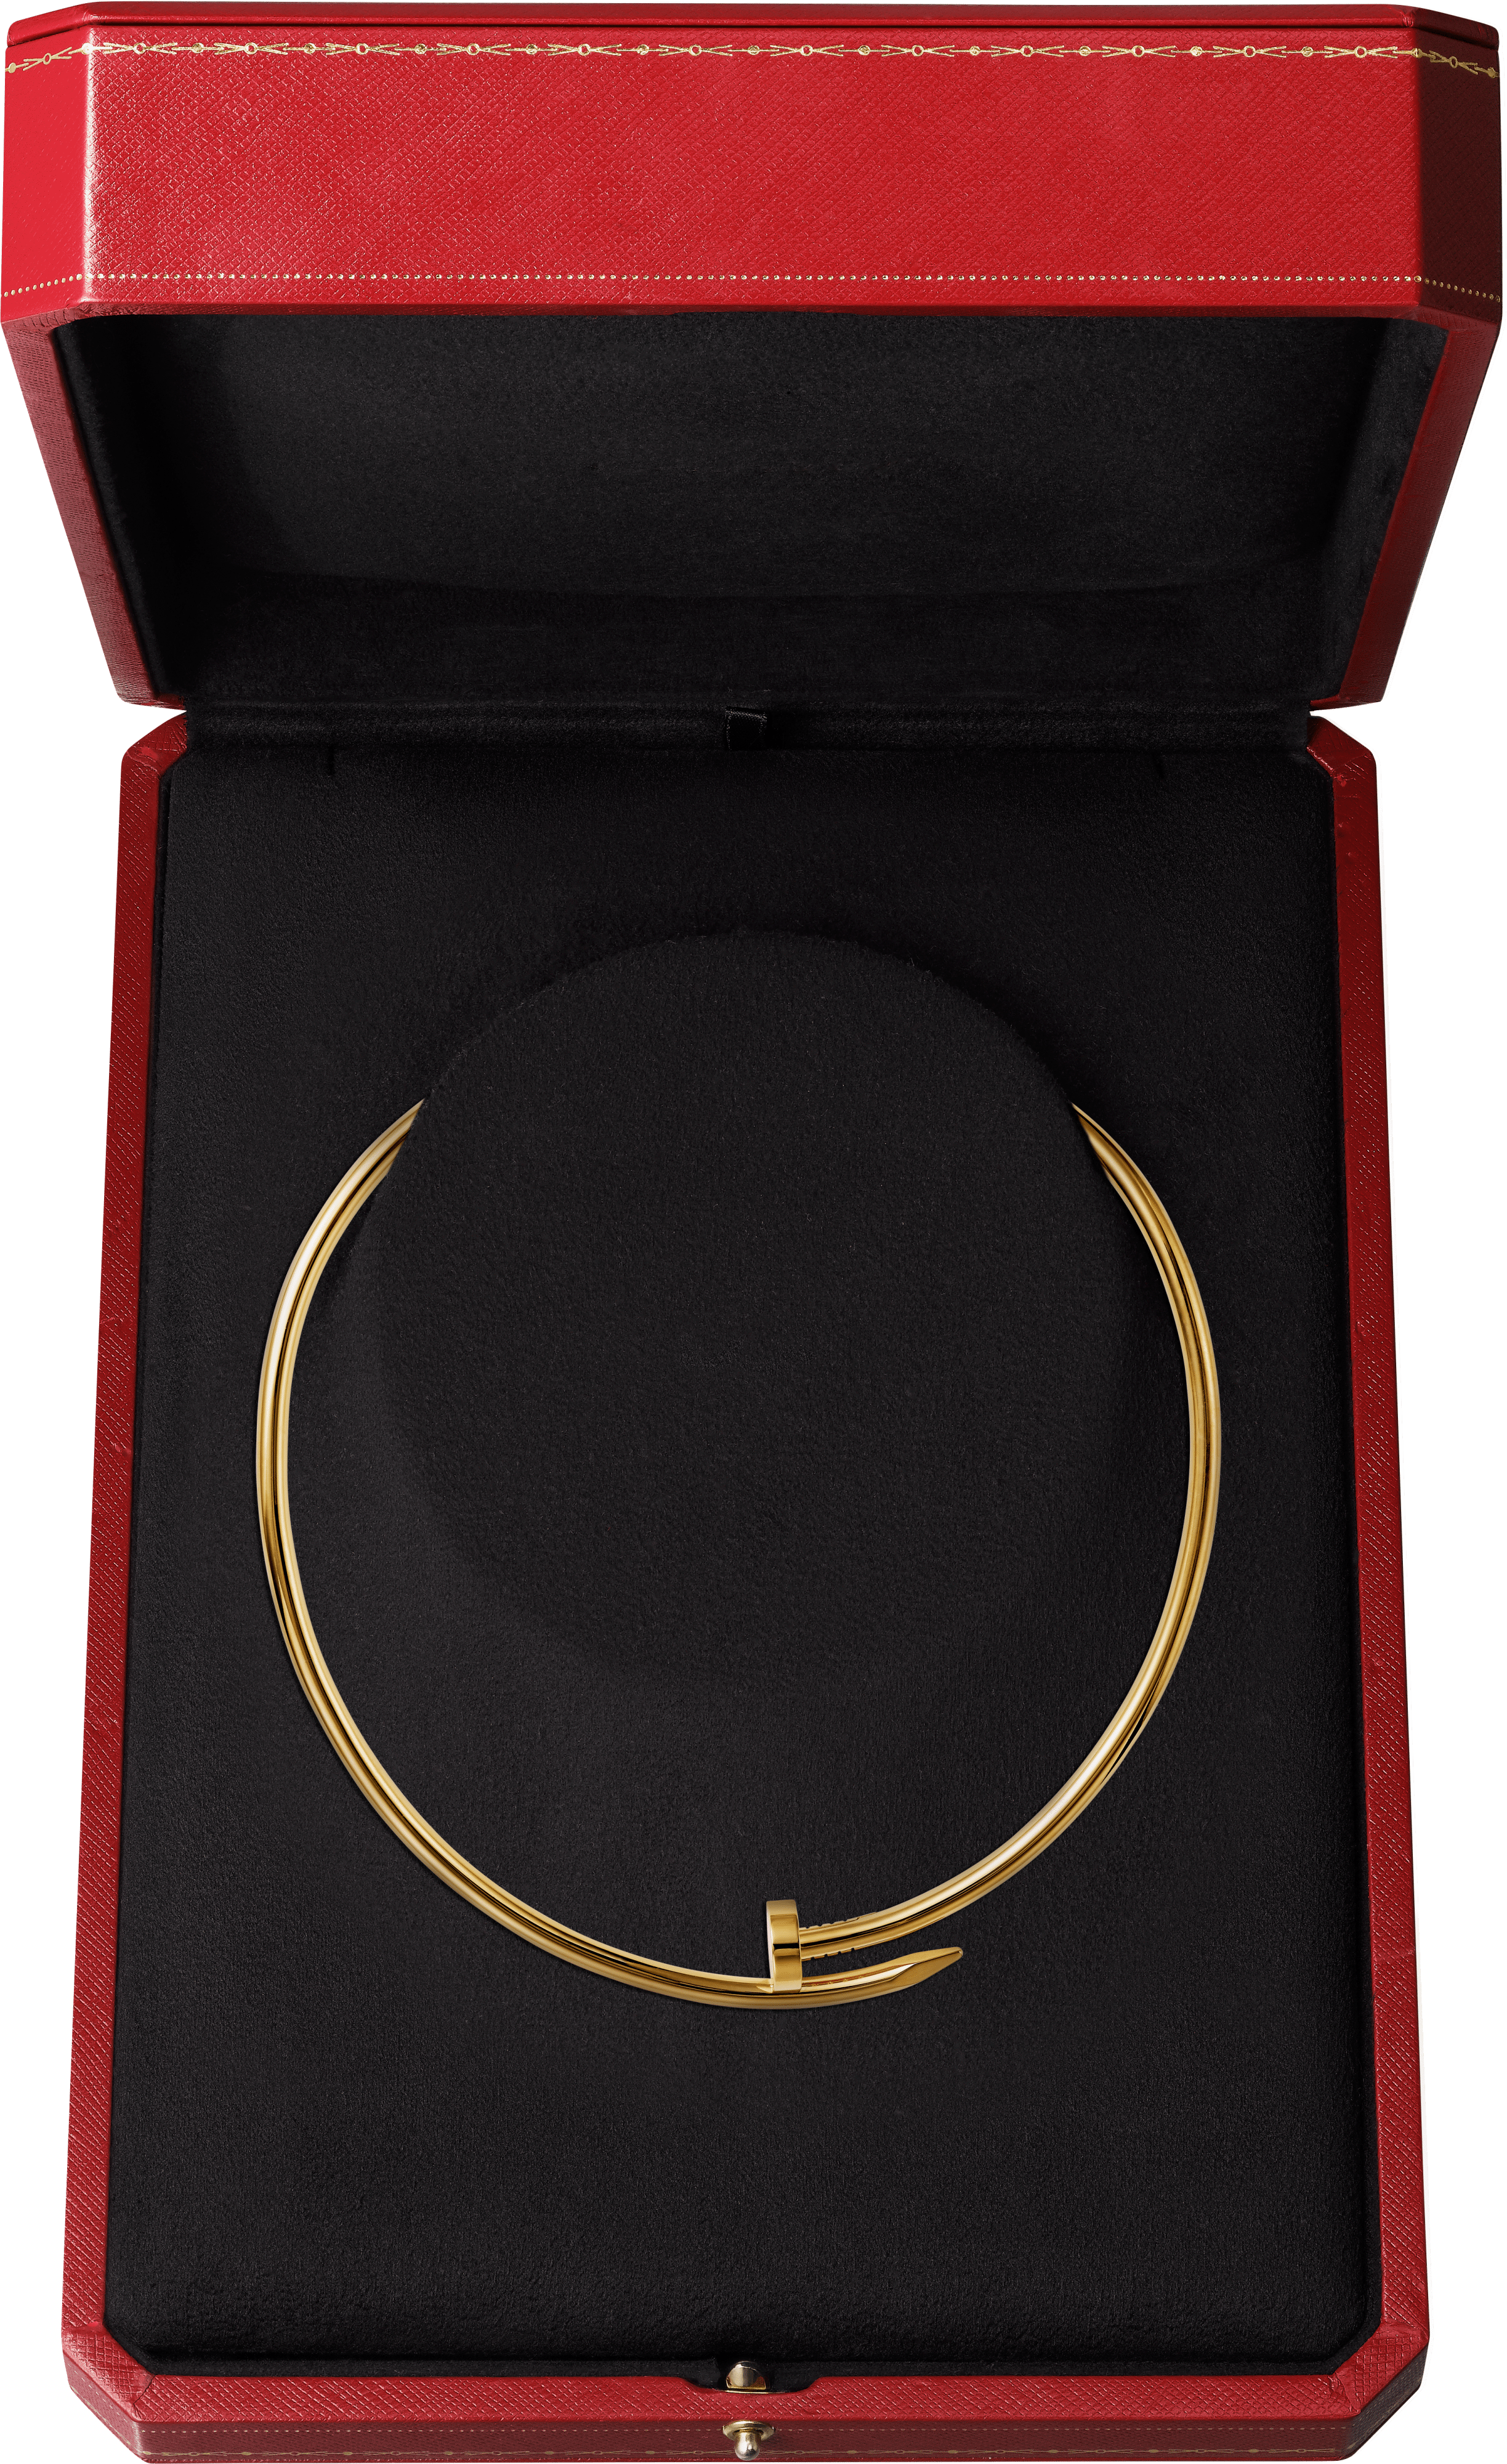 18K Gold Cartier Juste un Clou Necklace with Full Pave Diamonds | Expensive  jewelry luxury, Fancy jewelry, Expensive jewelry